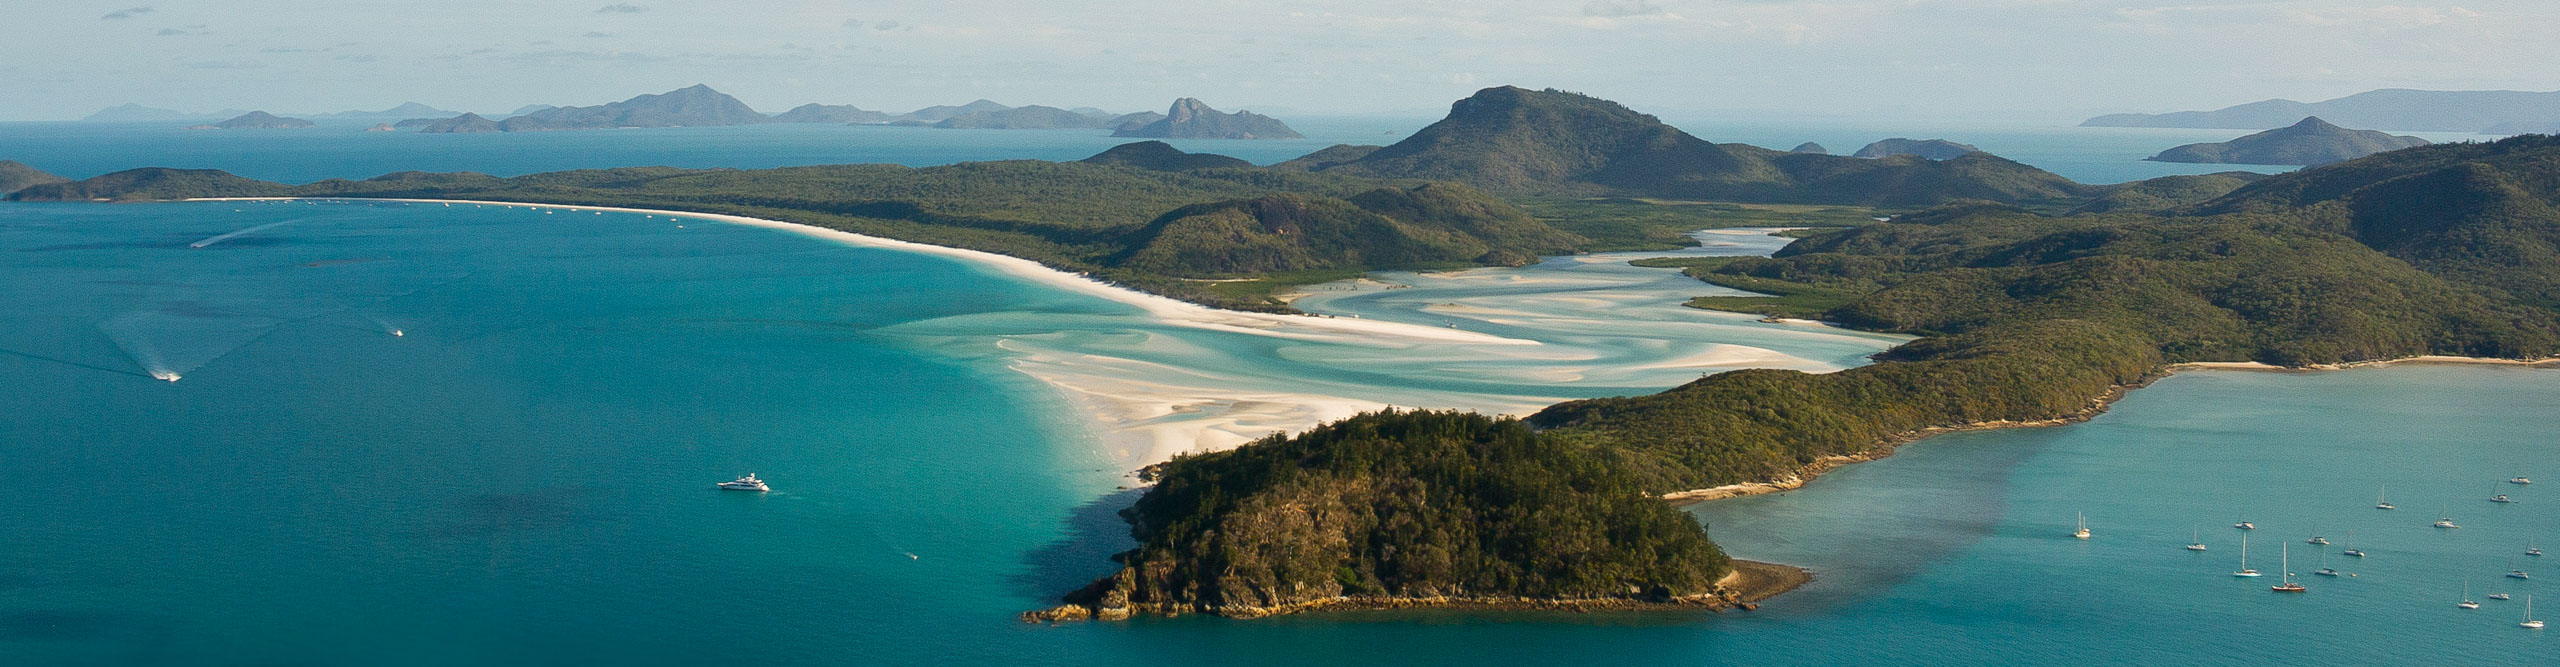 Aerial view over The Whitsunday Islands, Queensland, Australia.